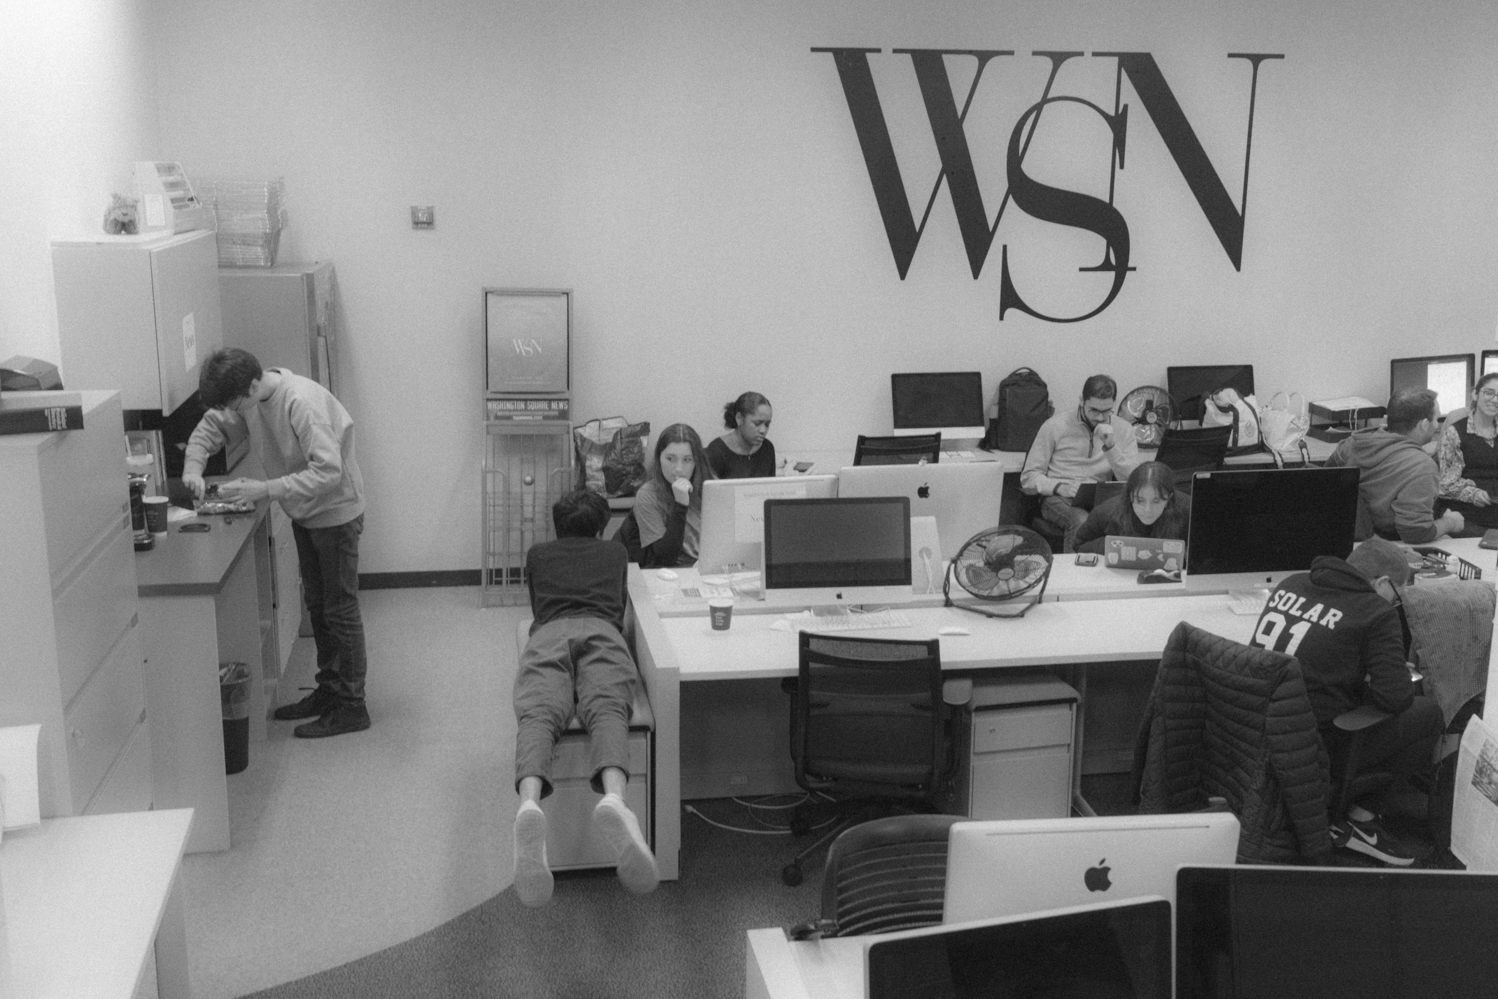 The W.S.N. office on the final day of production in the fall 2022 semester.